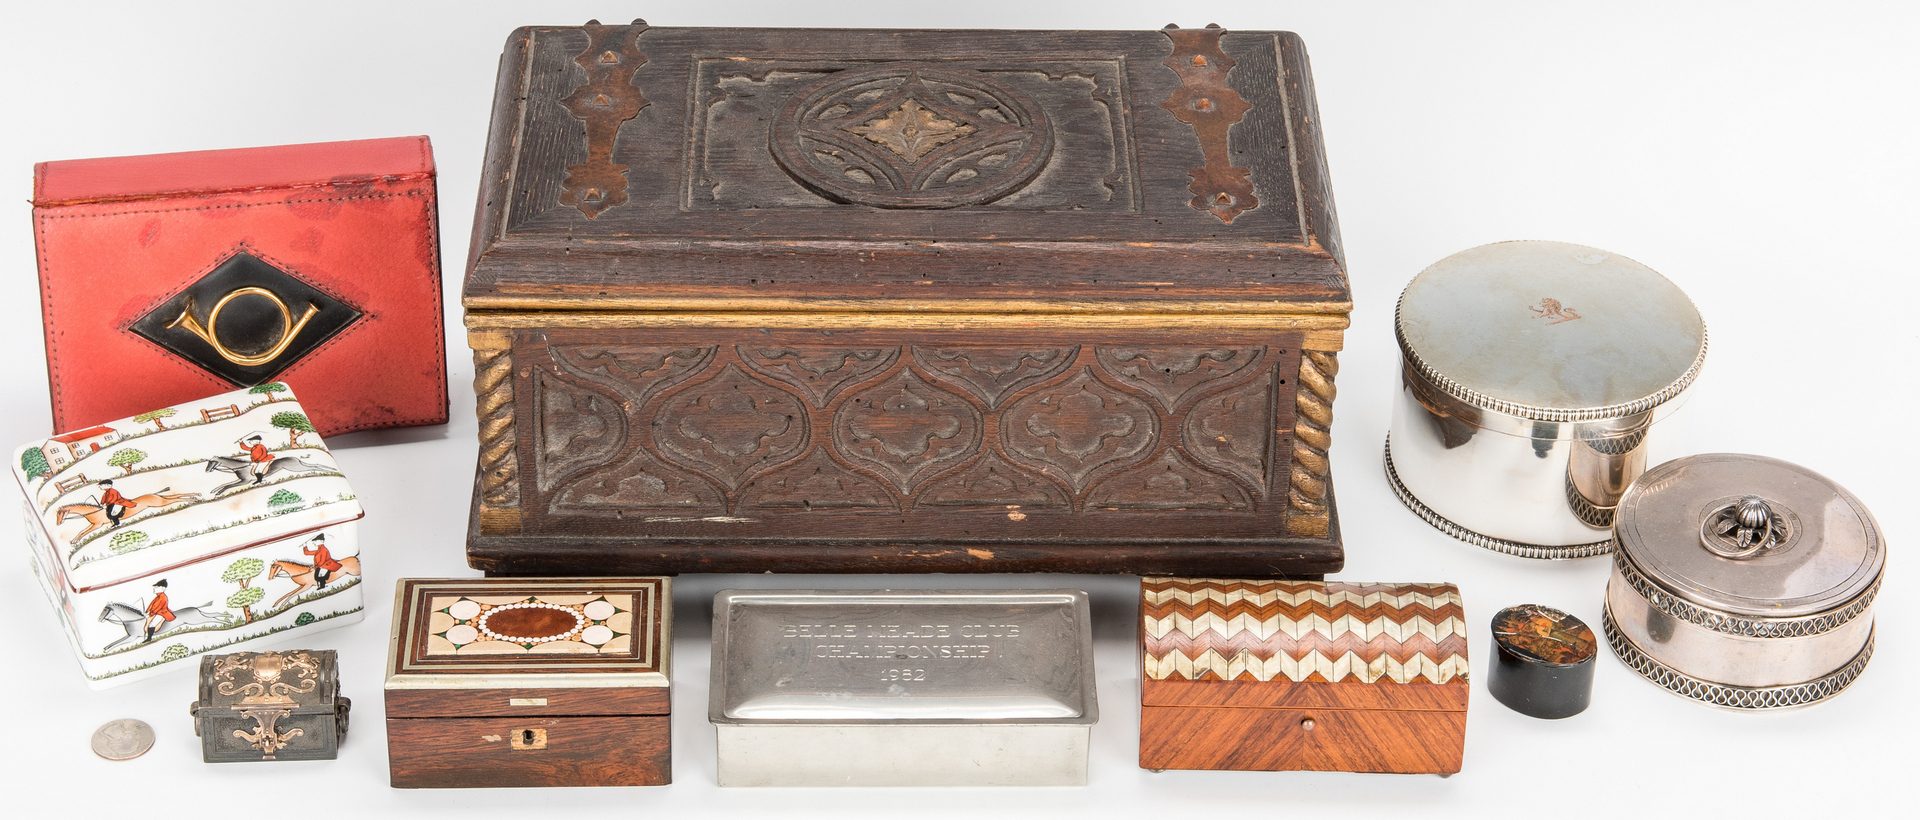 Lot 72: Group of 10 Assorted Decorative Boxes